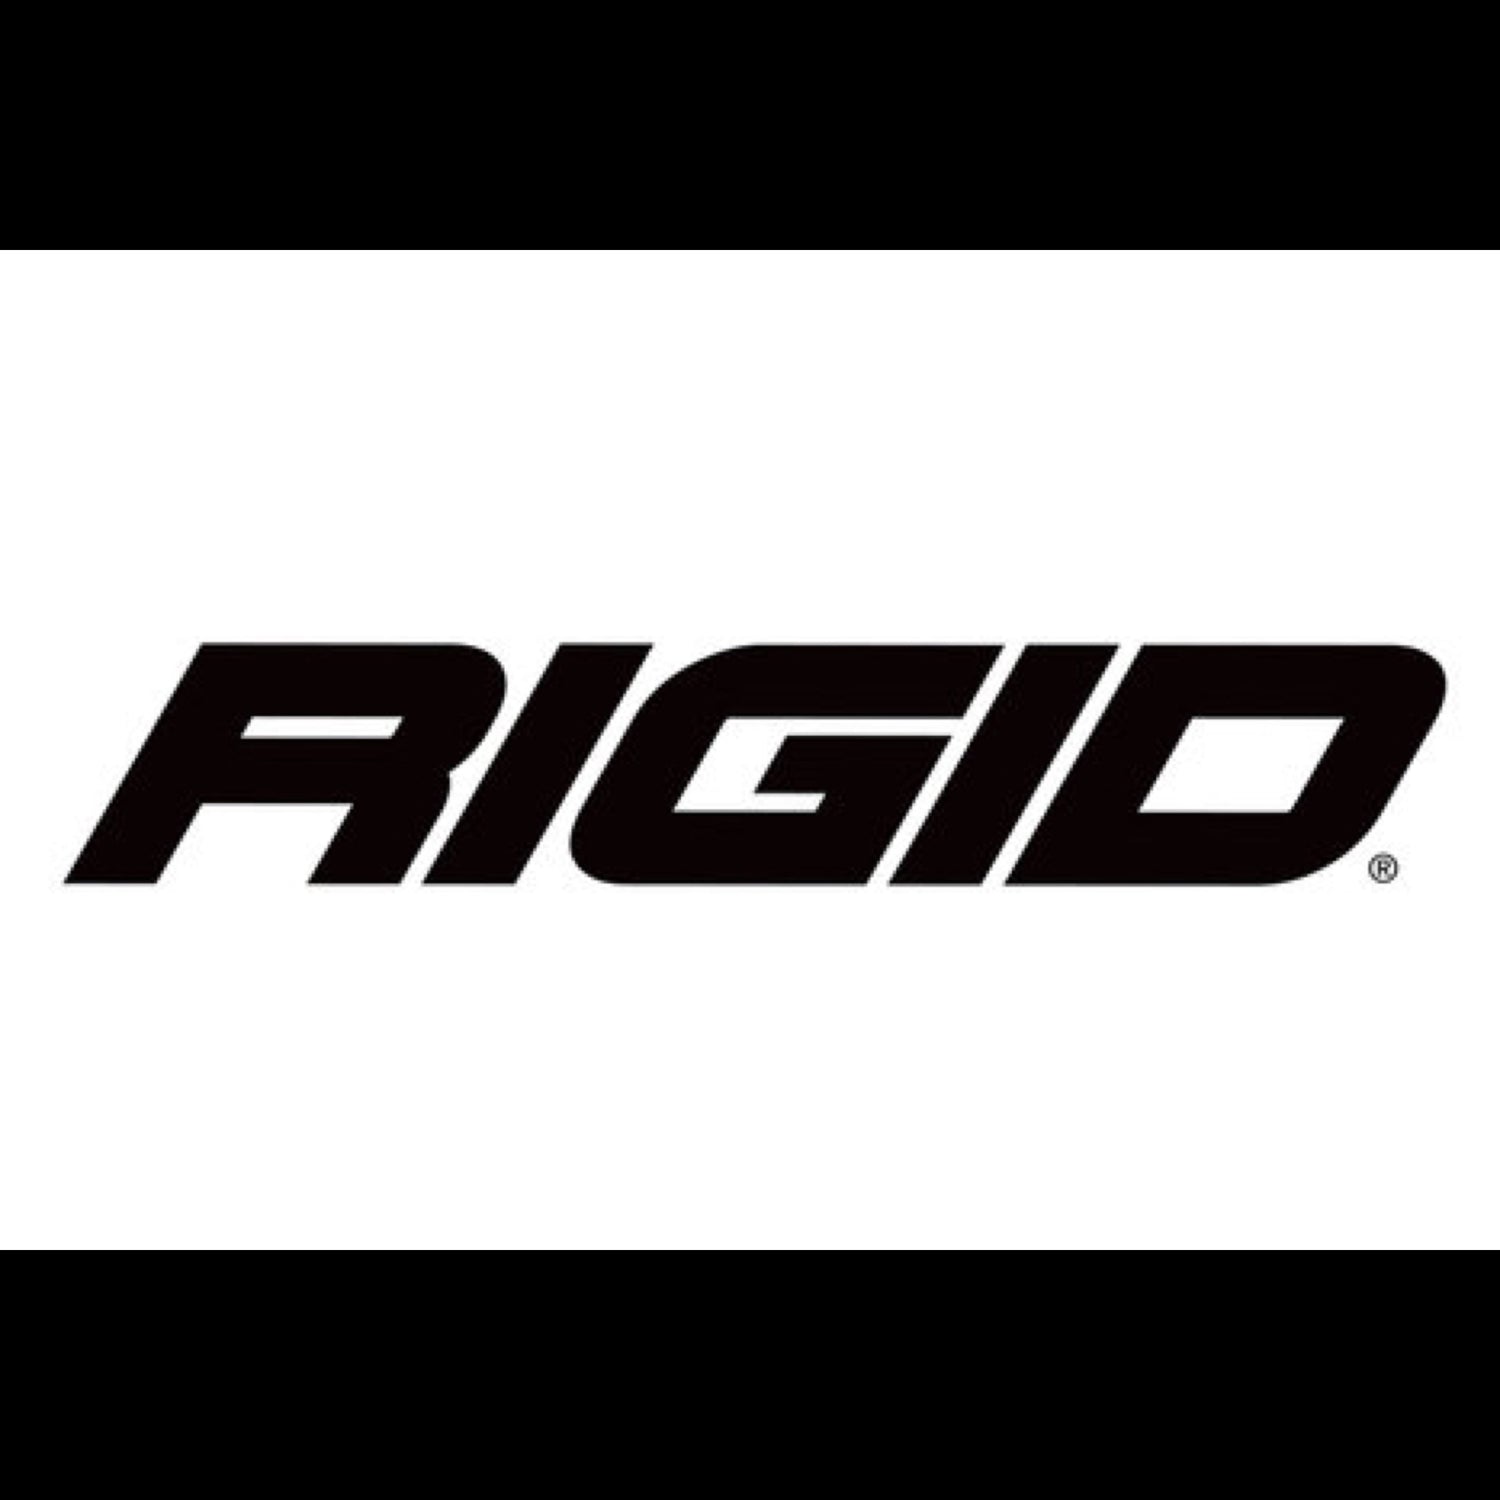 Rigid Industries lighting logo with white background